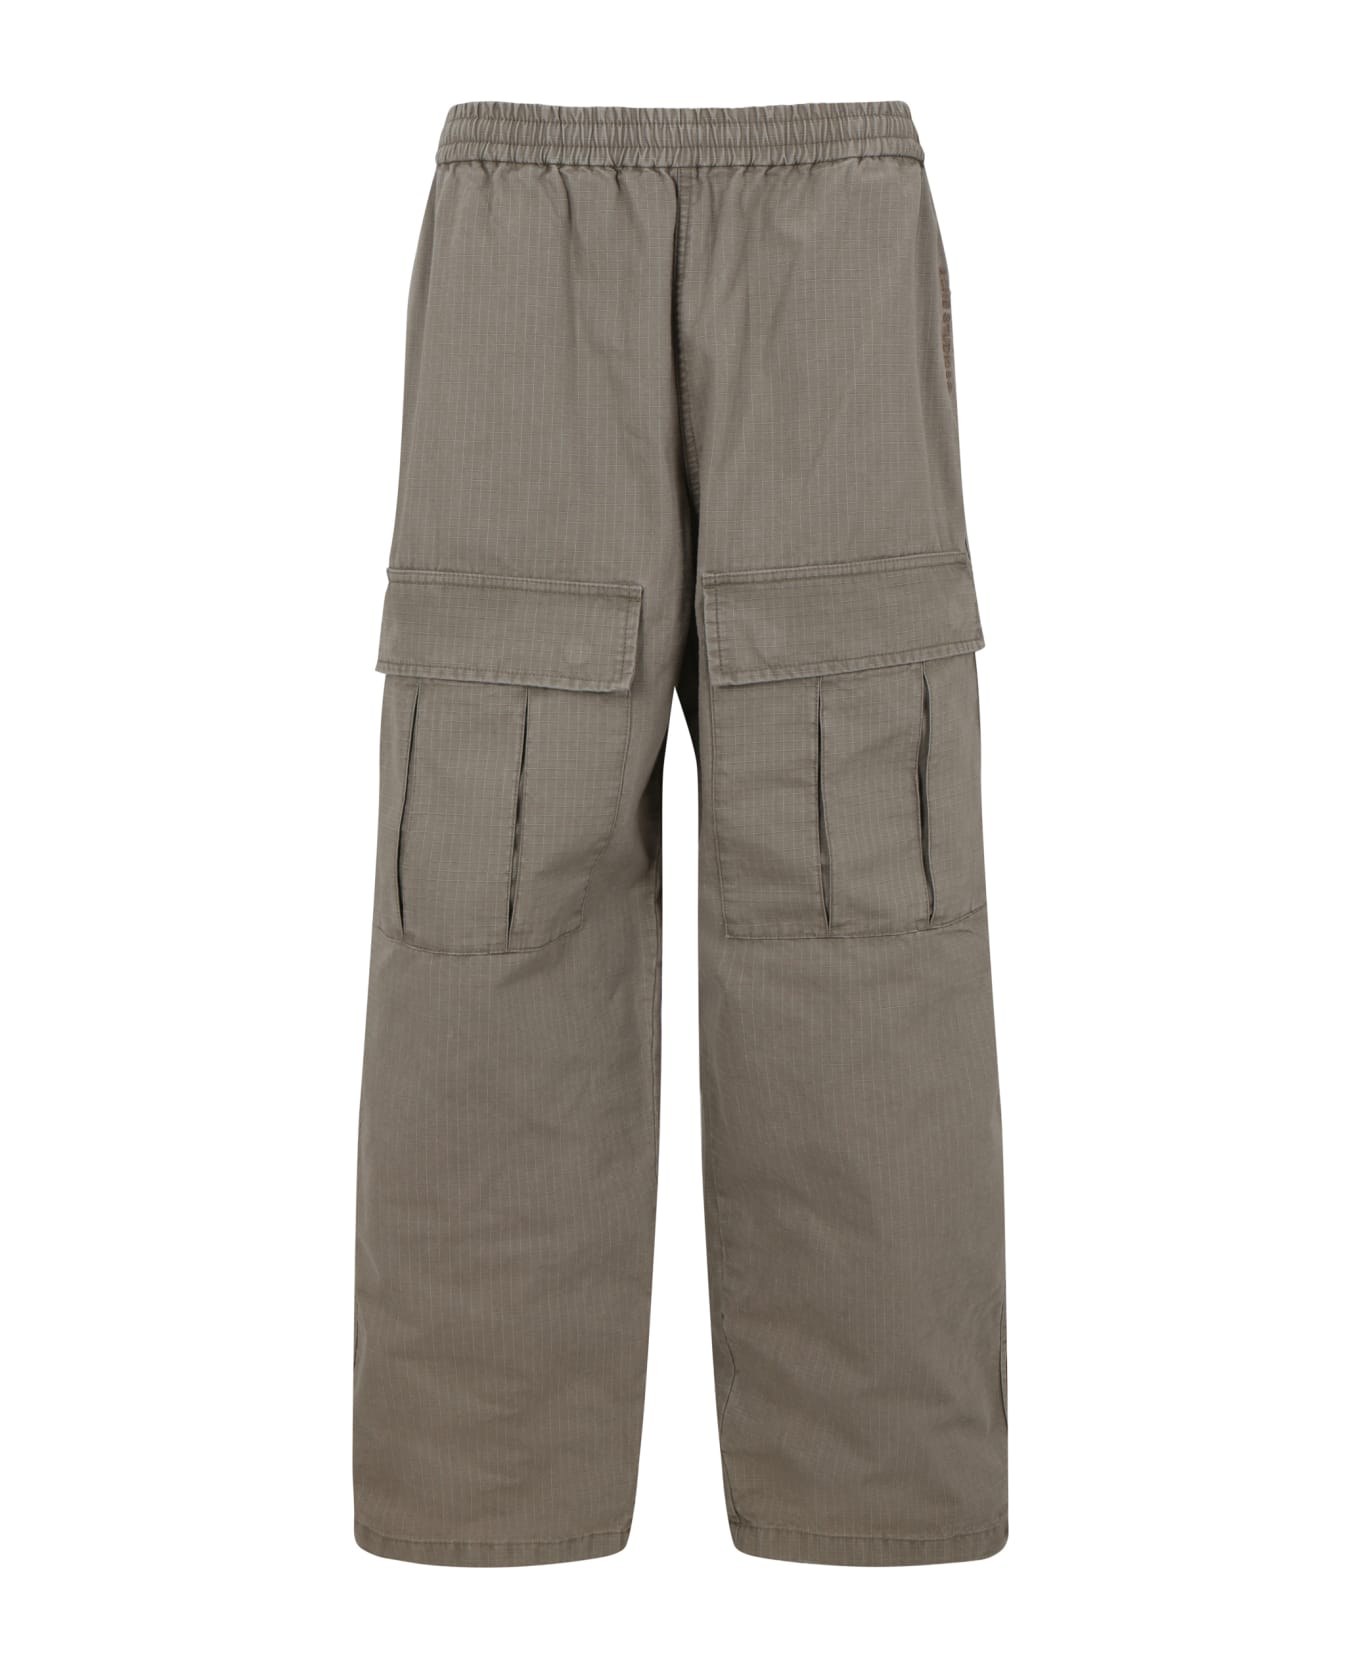 Acne Studios Logo Embroidered Mid-waist Pants - Cold Beige